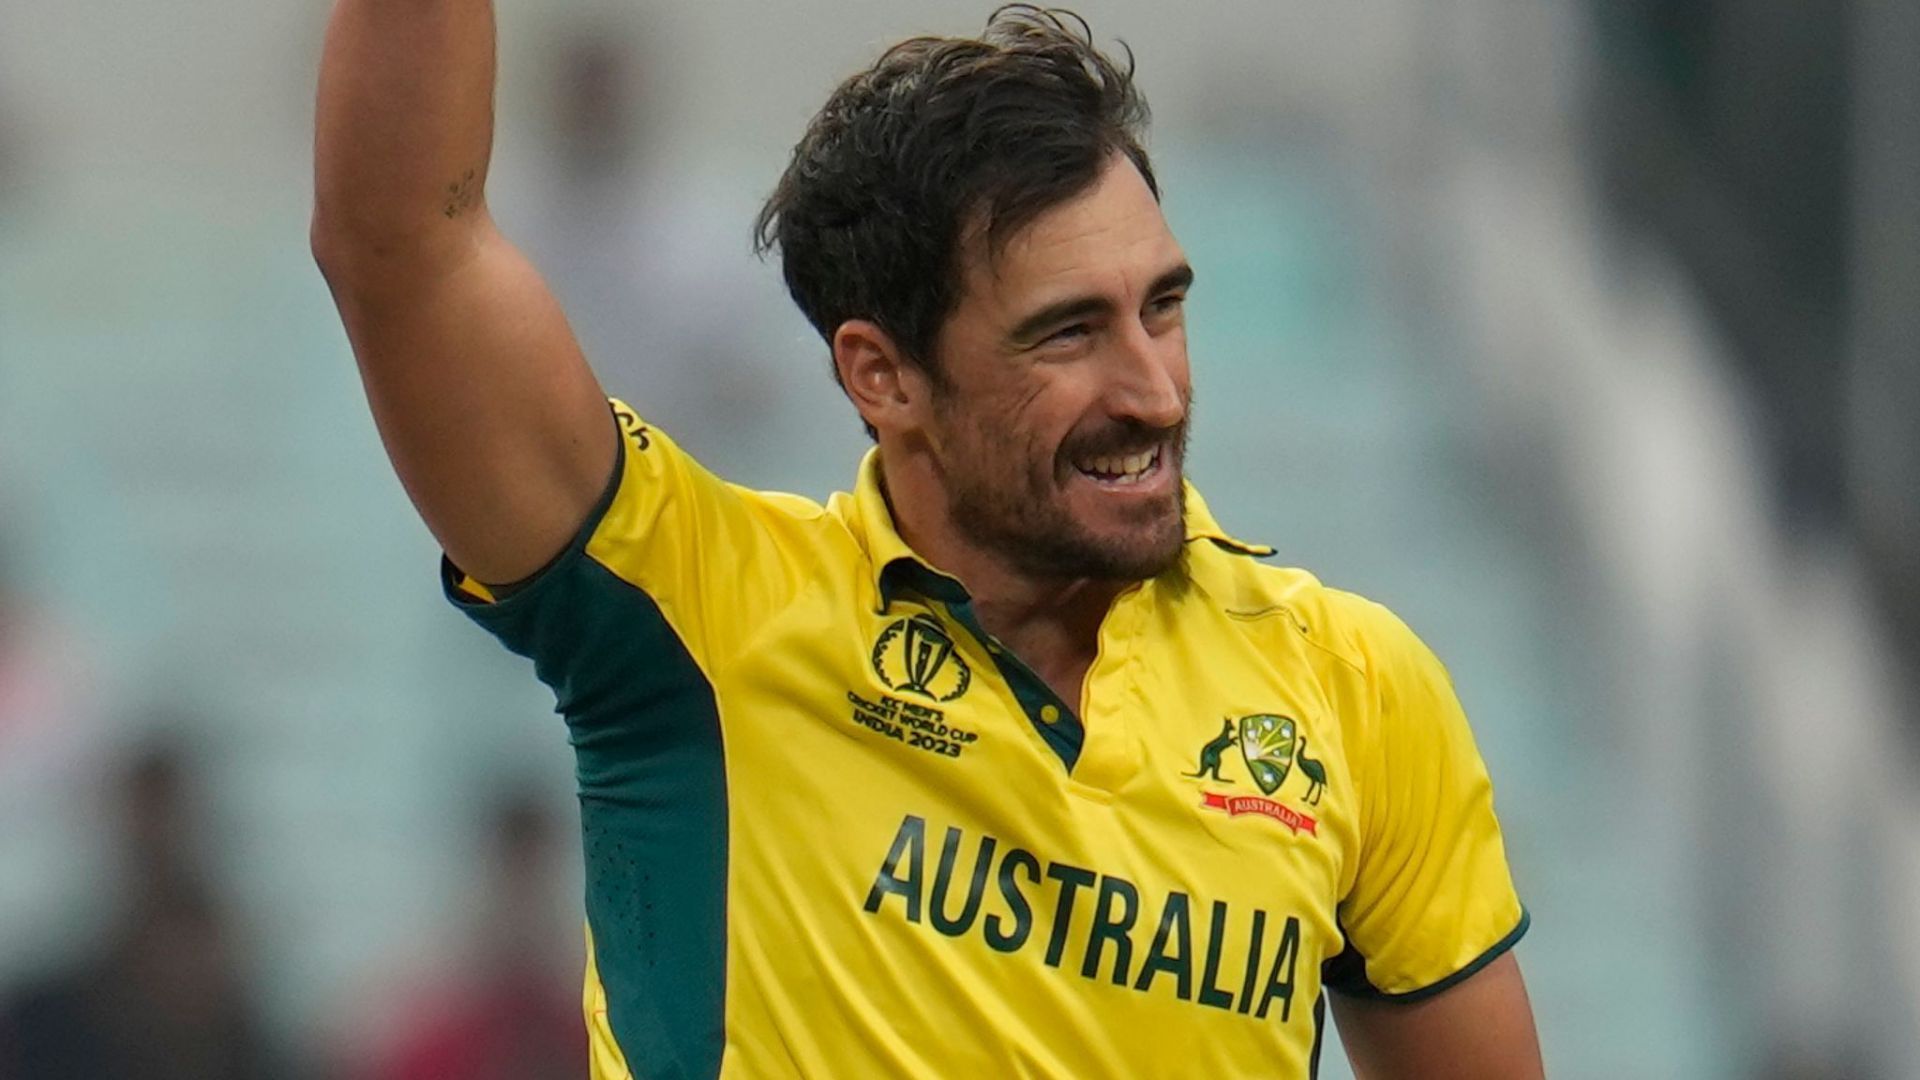 Mitchell Starc was previously bought by KKR for IPL 2018 but opted out of the tournament due to injury.